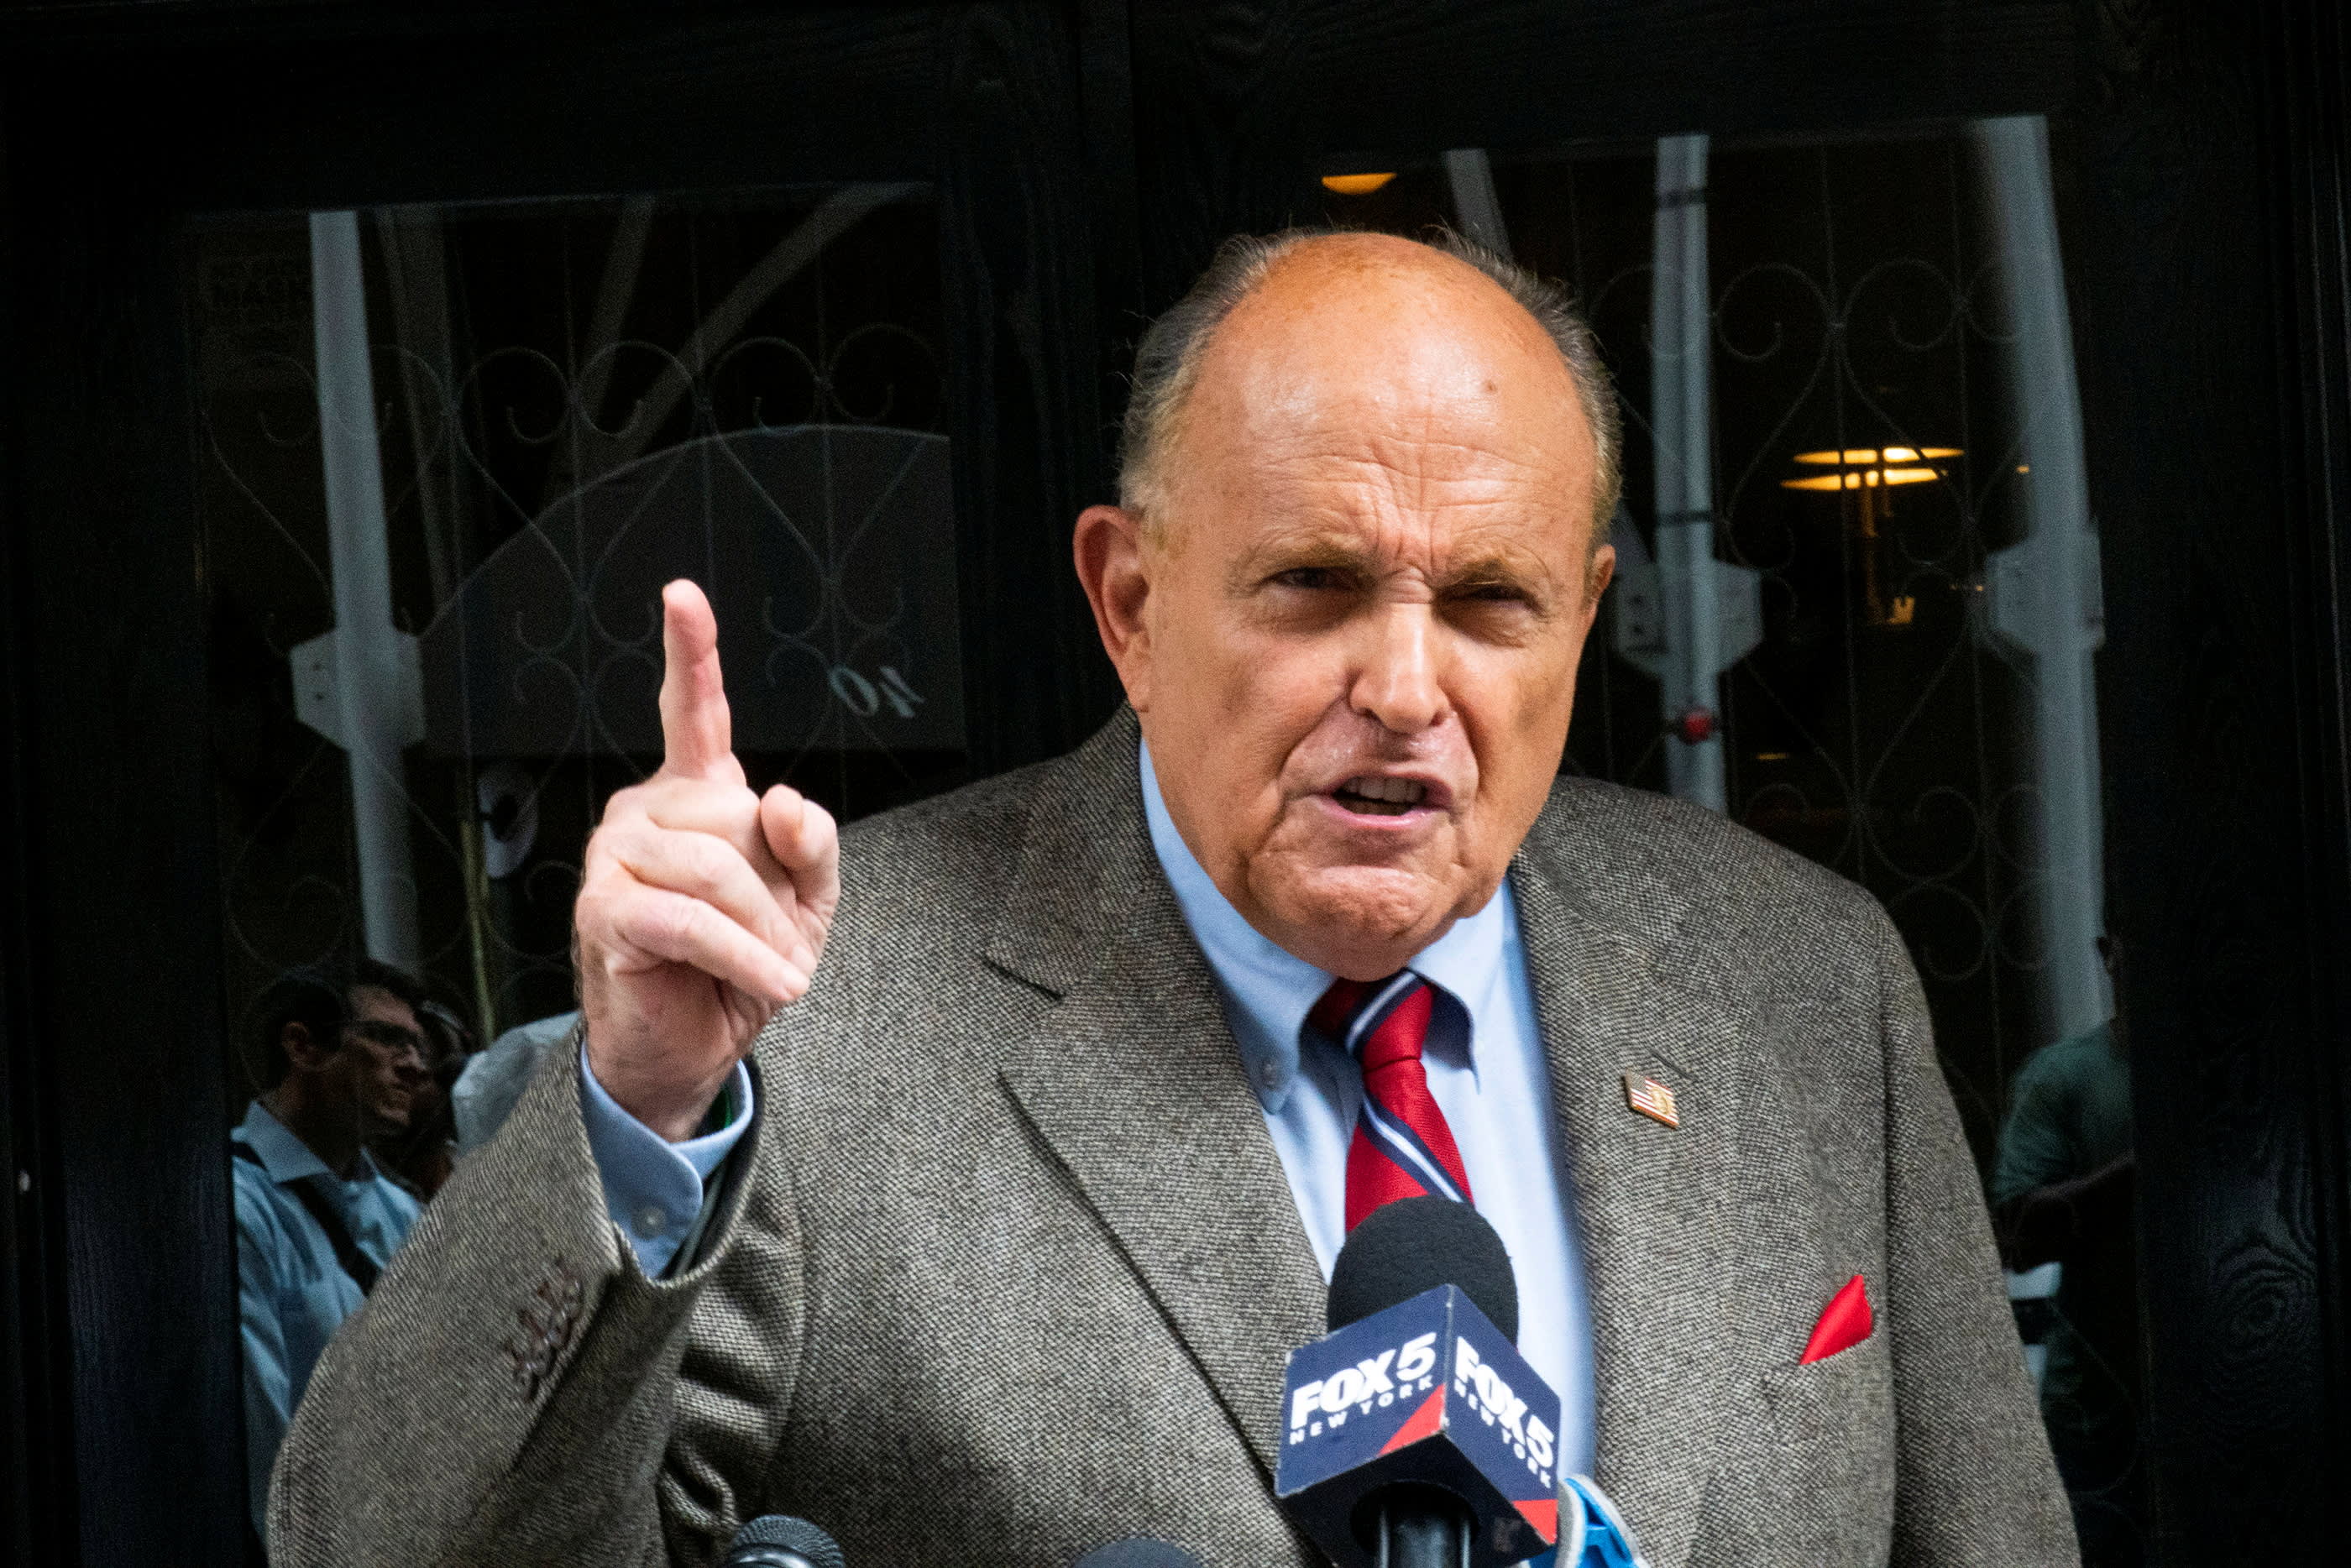 Trump lawyer Rudy Giuliani and other aides asked GOP prosecutor to give them Michigan county voting machines after 2020 election report says – CNBC